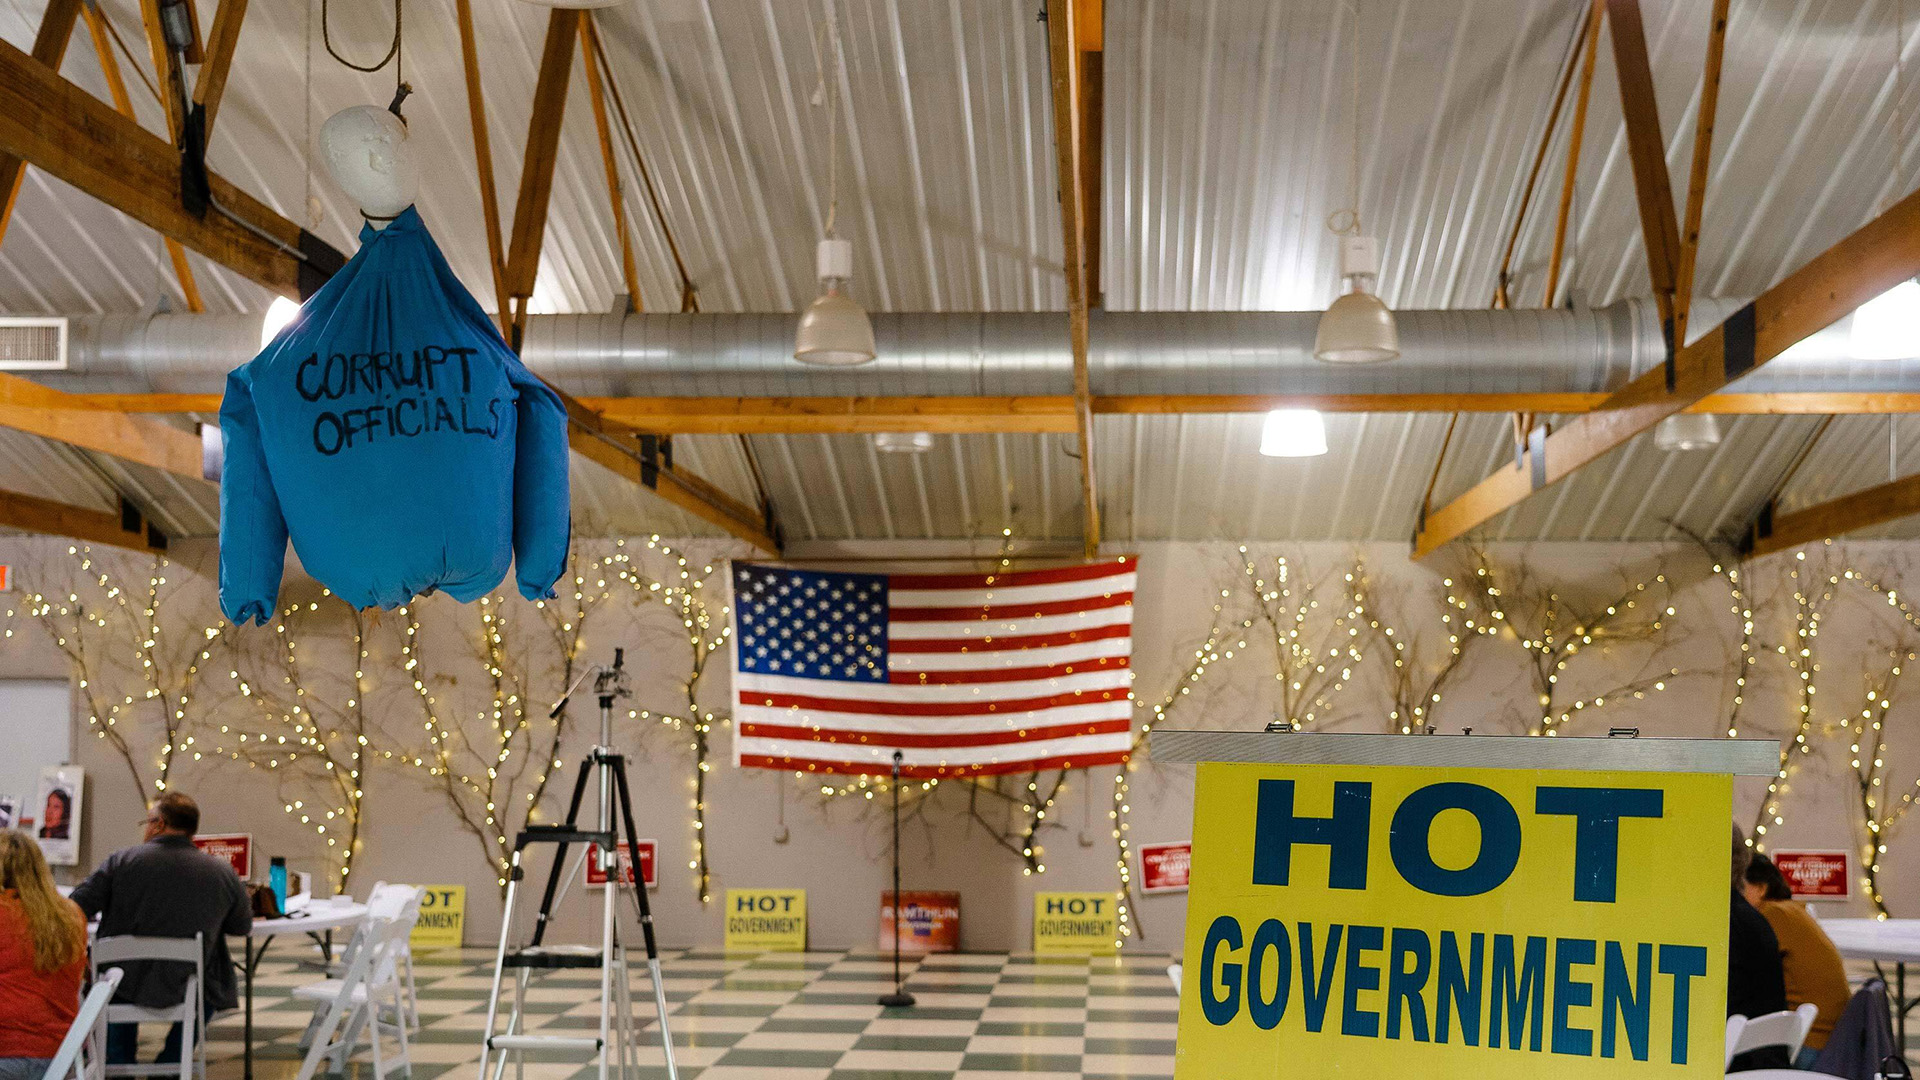 An effigy of a human torso with a shirt labeled "Corrupt Officials" hangs from the wooden rafters of a room with people seated in chairs, an American flag and branches with LED lights mounted on a wall in the background and a political sign reading "HOT Government" in the foreground.